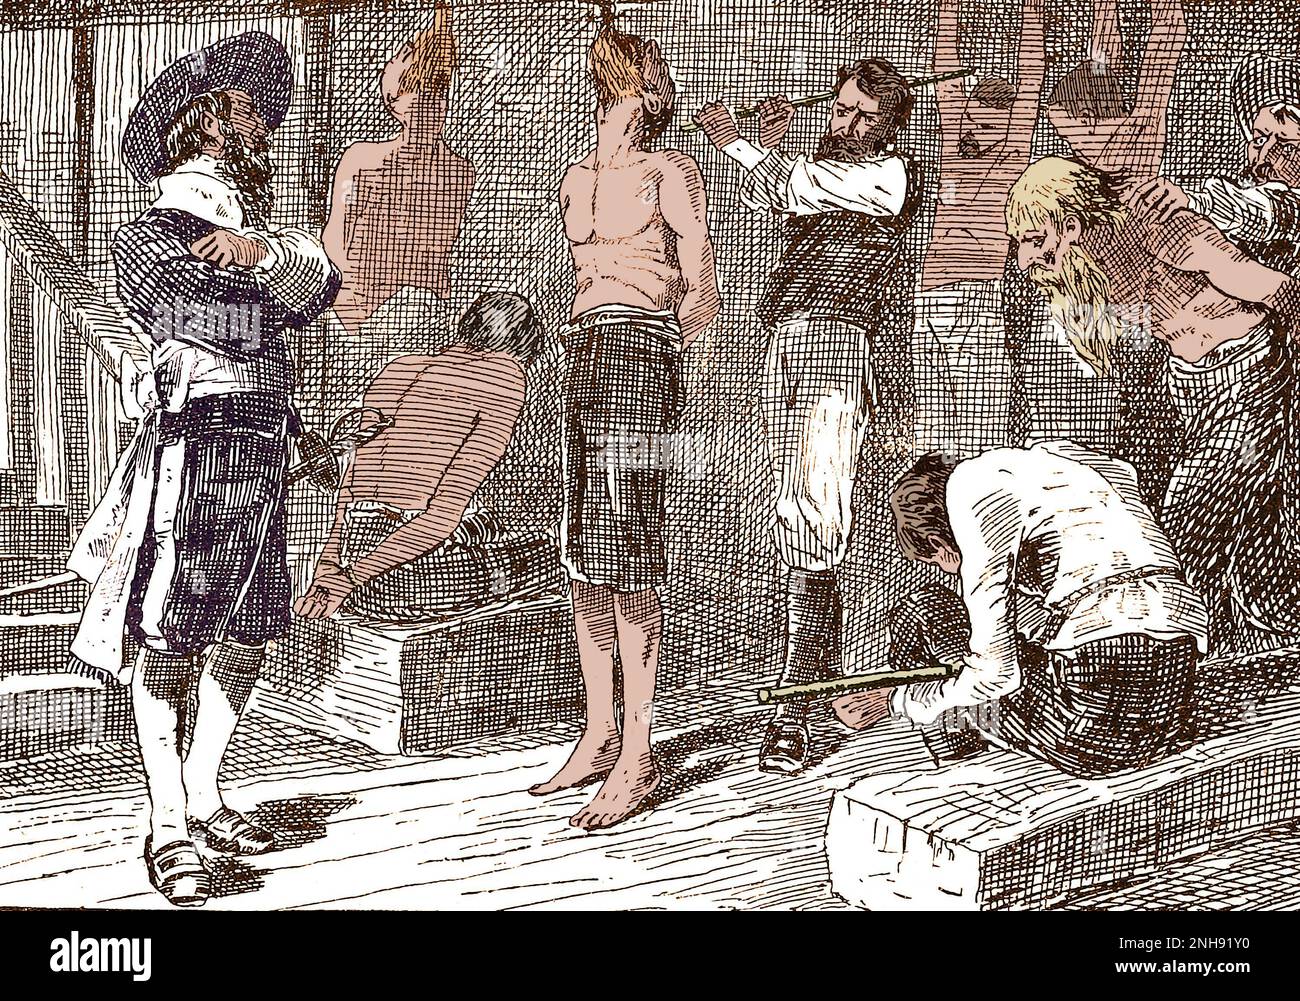 Pirate Henry Morgan torturing prisoners. Sir Henry Morgan (1635-1688) was a Welsh privateer, plantation owner, and, later, Lieutenant Governor of Jamaica. Illustration by John Abbott, 1874. Colorized. Stock Photo